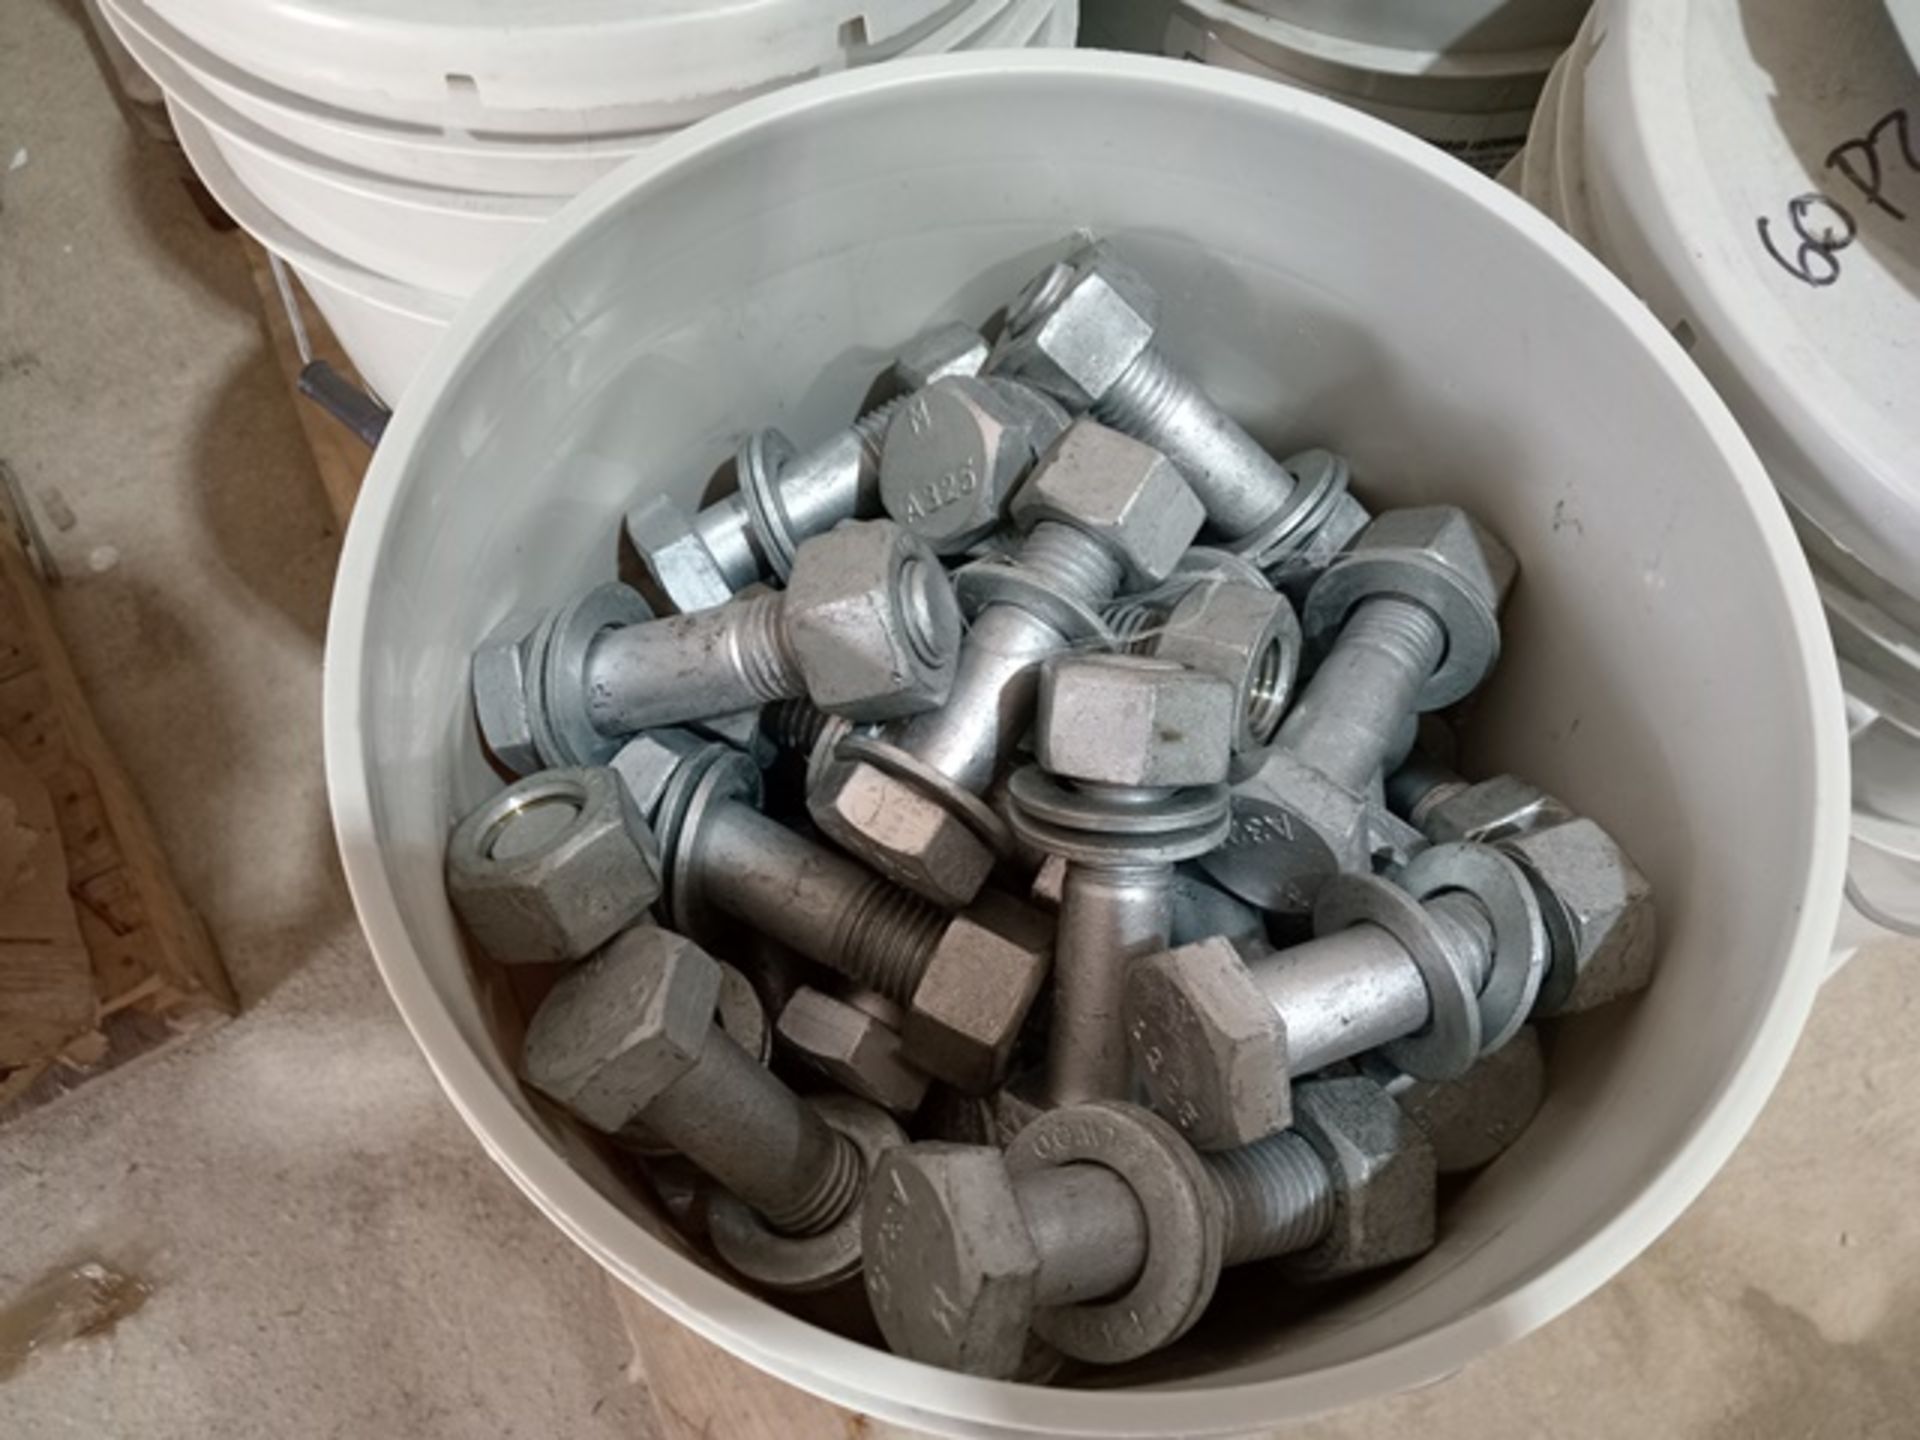 LOT OF (2891) HEXAGONAL HEAD BOLTS WITH NUT - Image 3 of 5